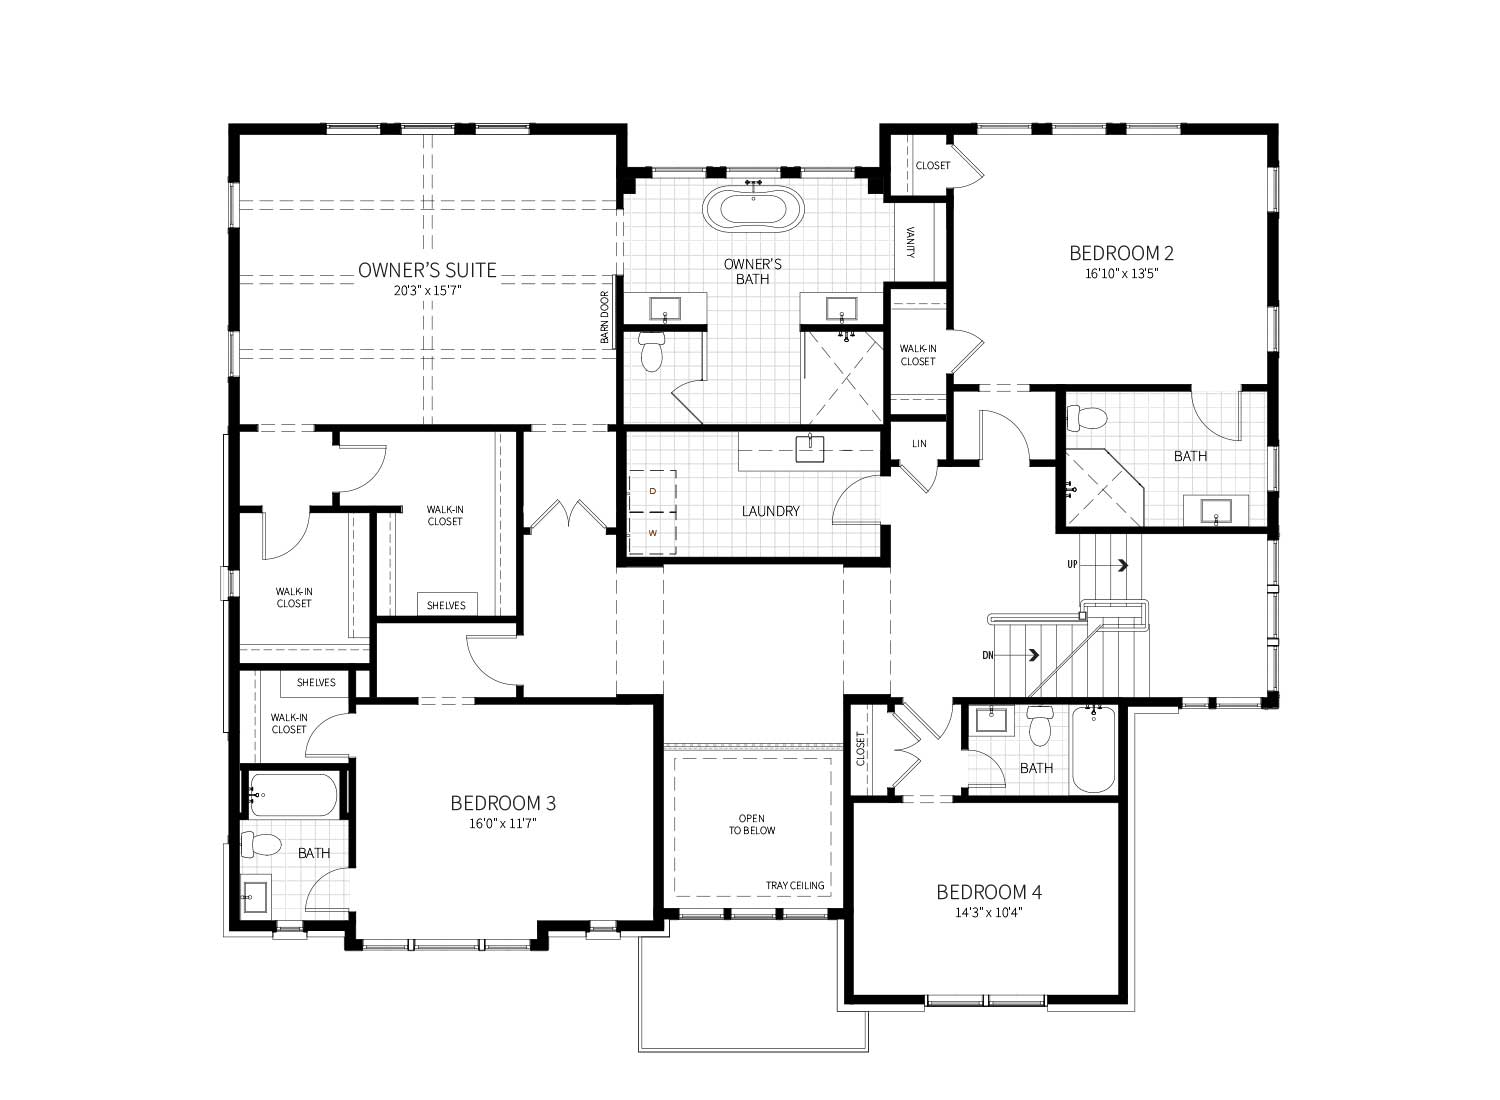 Second floor plan of the Geranium model, showing Owner's Suite, and 3 full bedrooms with baths.